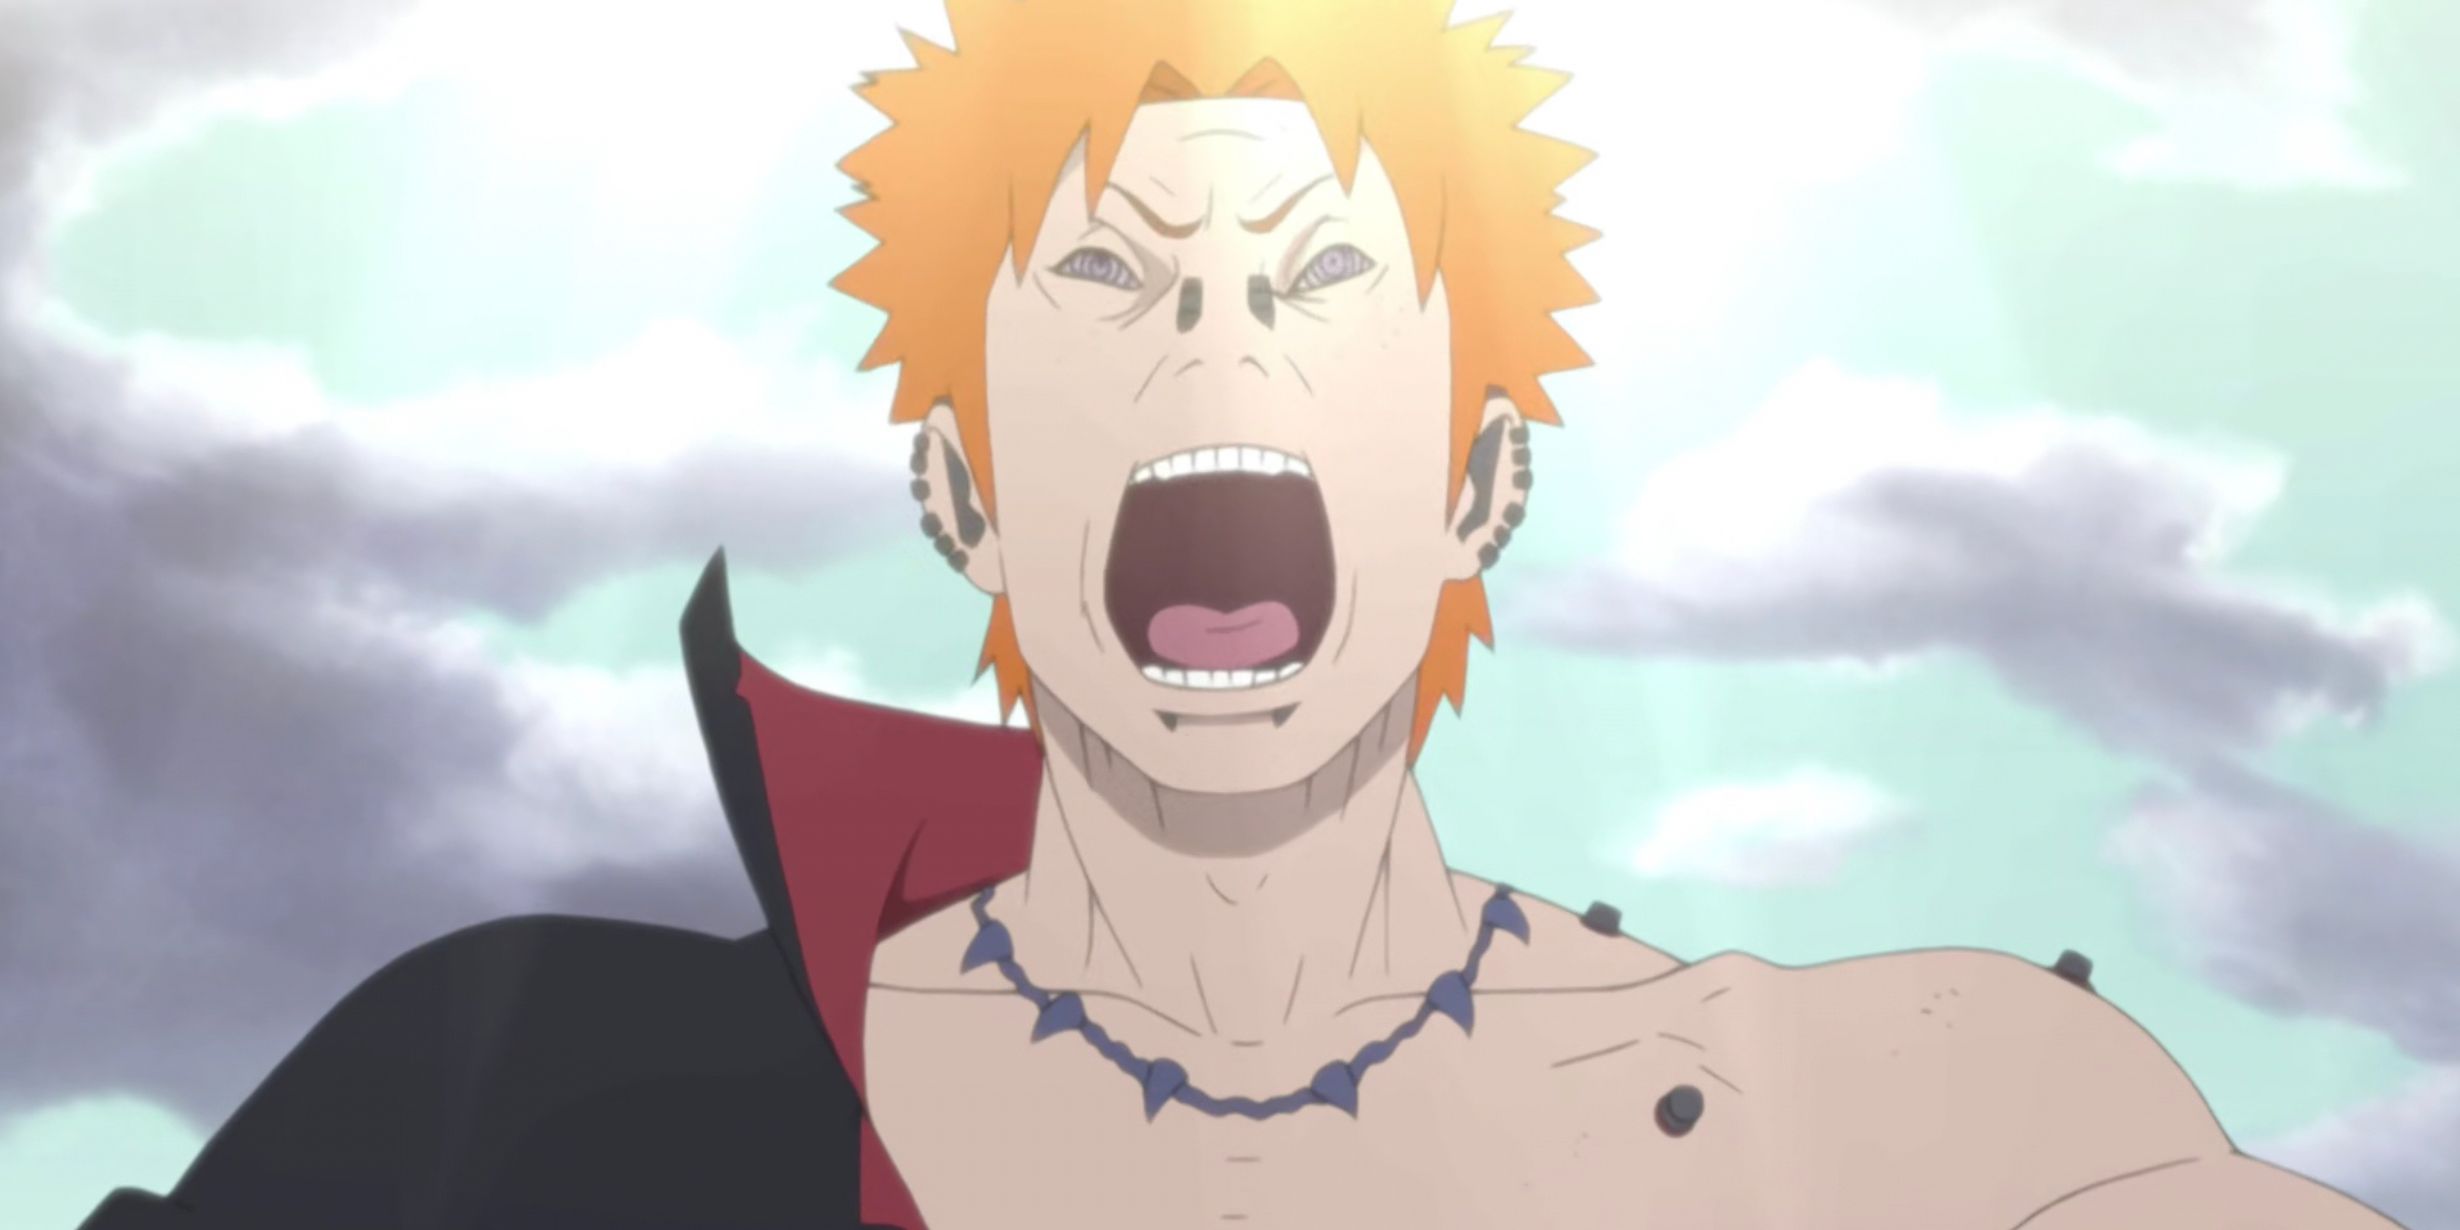 Pain yelling his attack in the Naruto Shippuden episode Planetary Devastation